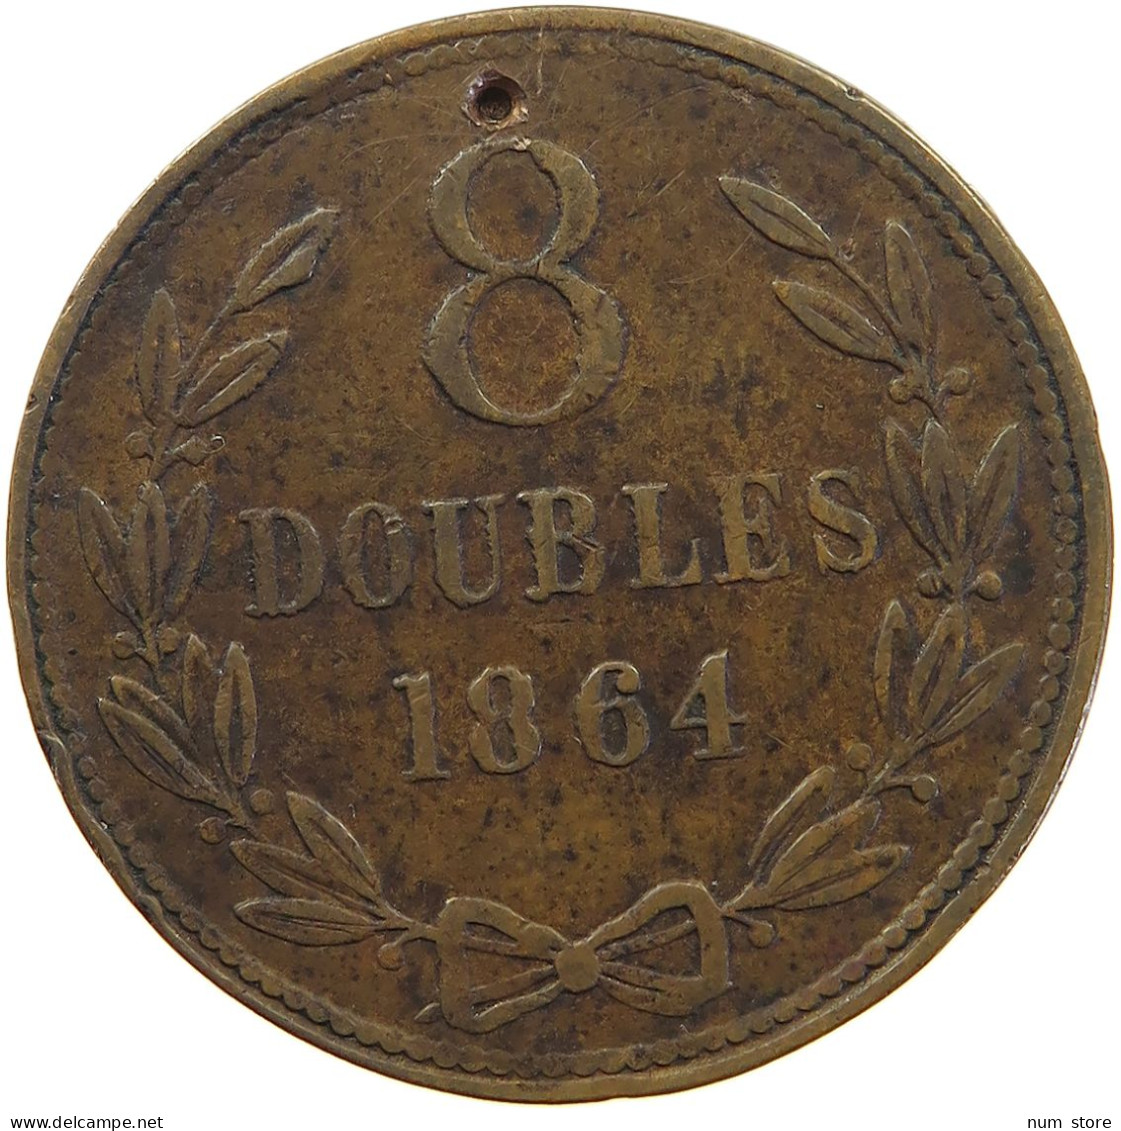 GUERNSEY 8 DOUBLES 1864 VICTORIA 1837-1901 #MA 064888 - Guernesey